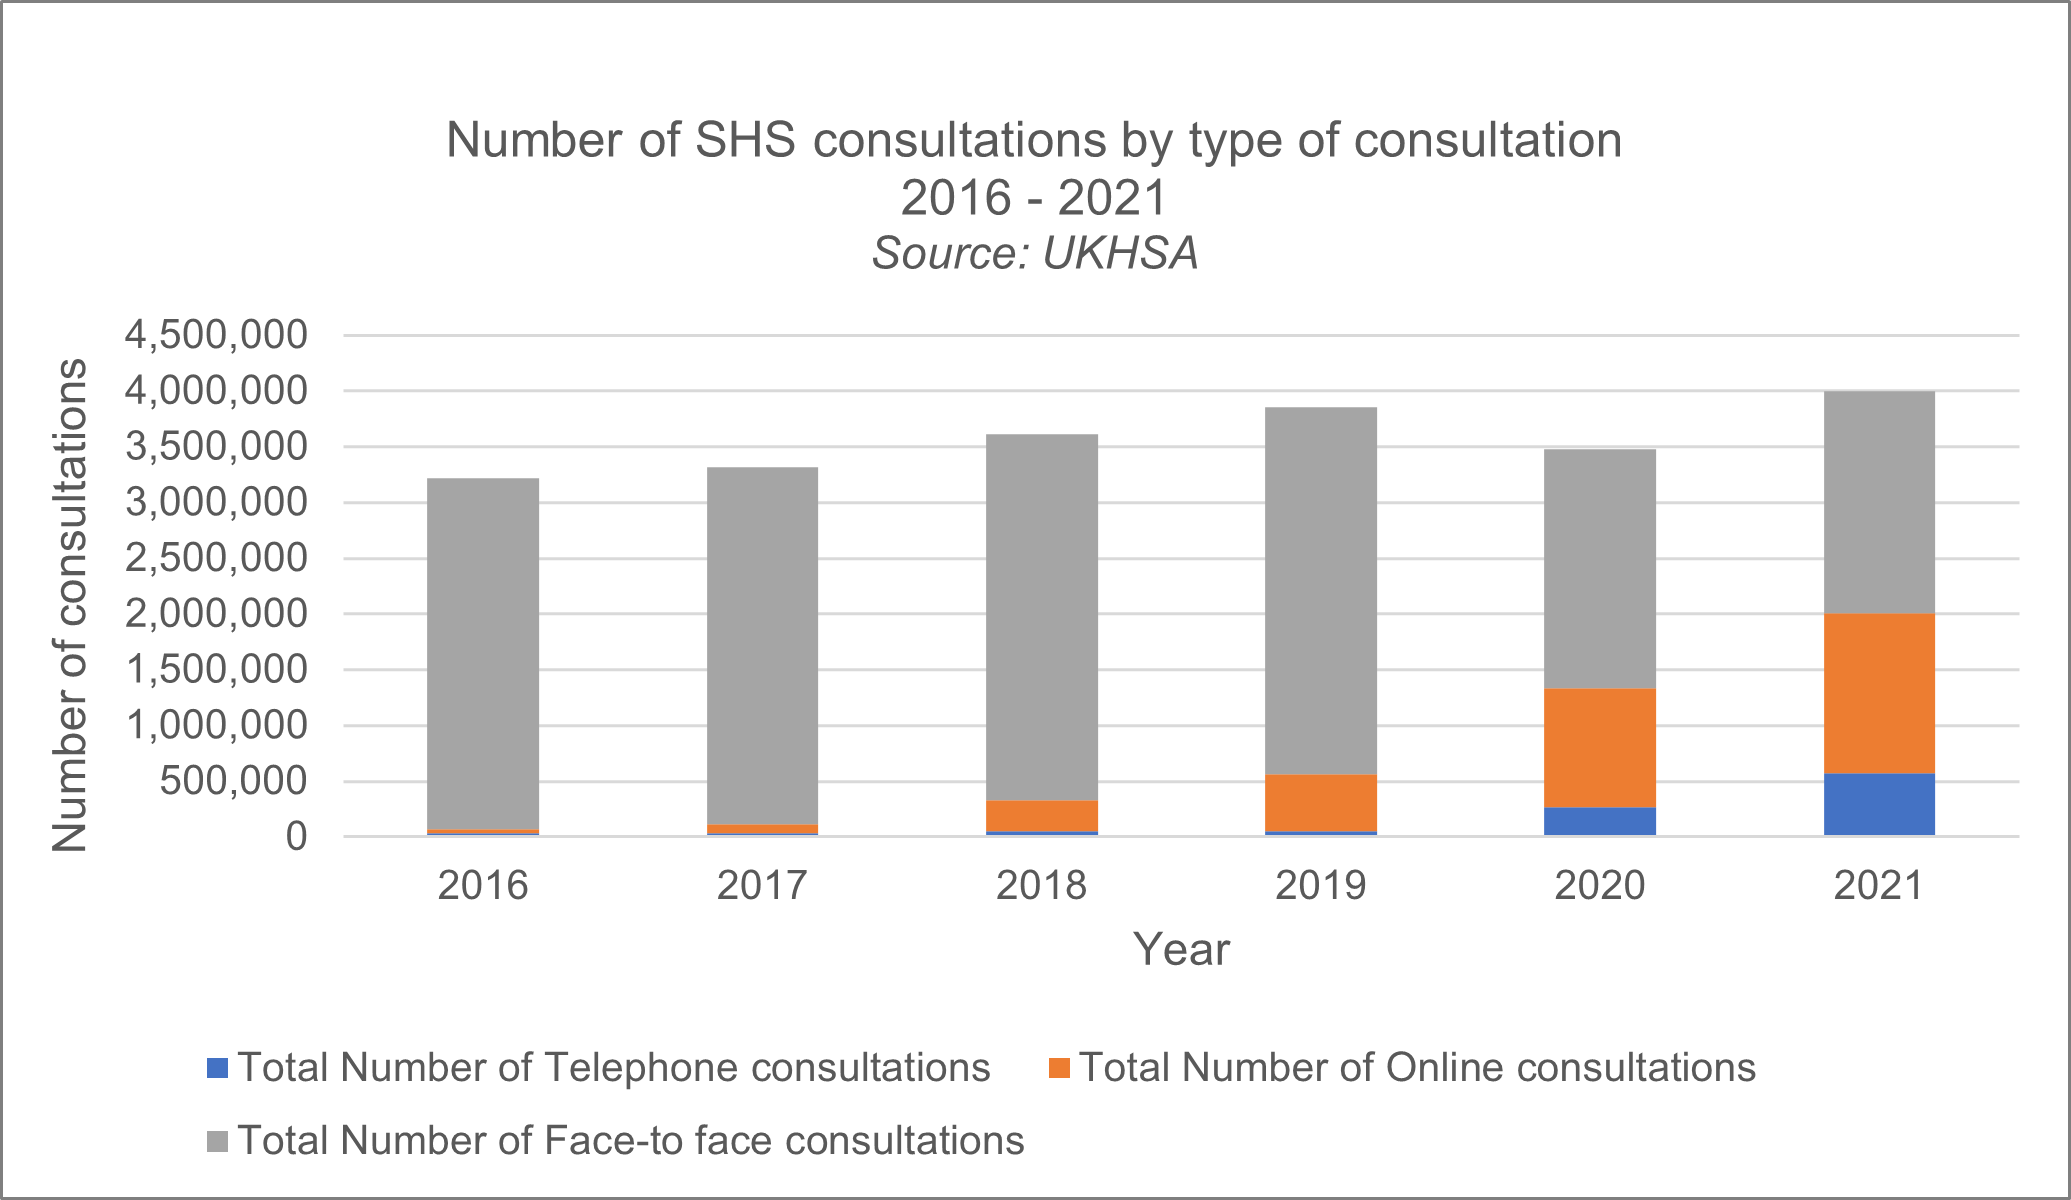 Over the last six years there has been an increase in the number of online and telephone consultations and a decrease in the proportion of face to face consultations. In 2016, there were 3,147,899 face to face consultations, 32,171 online consultations and 37,486 telephone consultations. In 2021, there were 1,995,271 face to face consultations, 1,432,557 online consultations and 574,999 telephone consultations. 